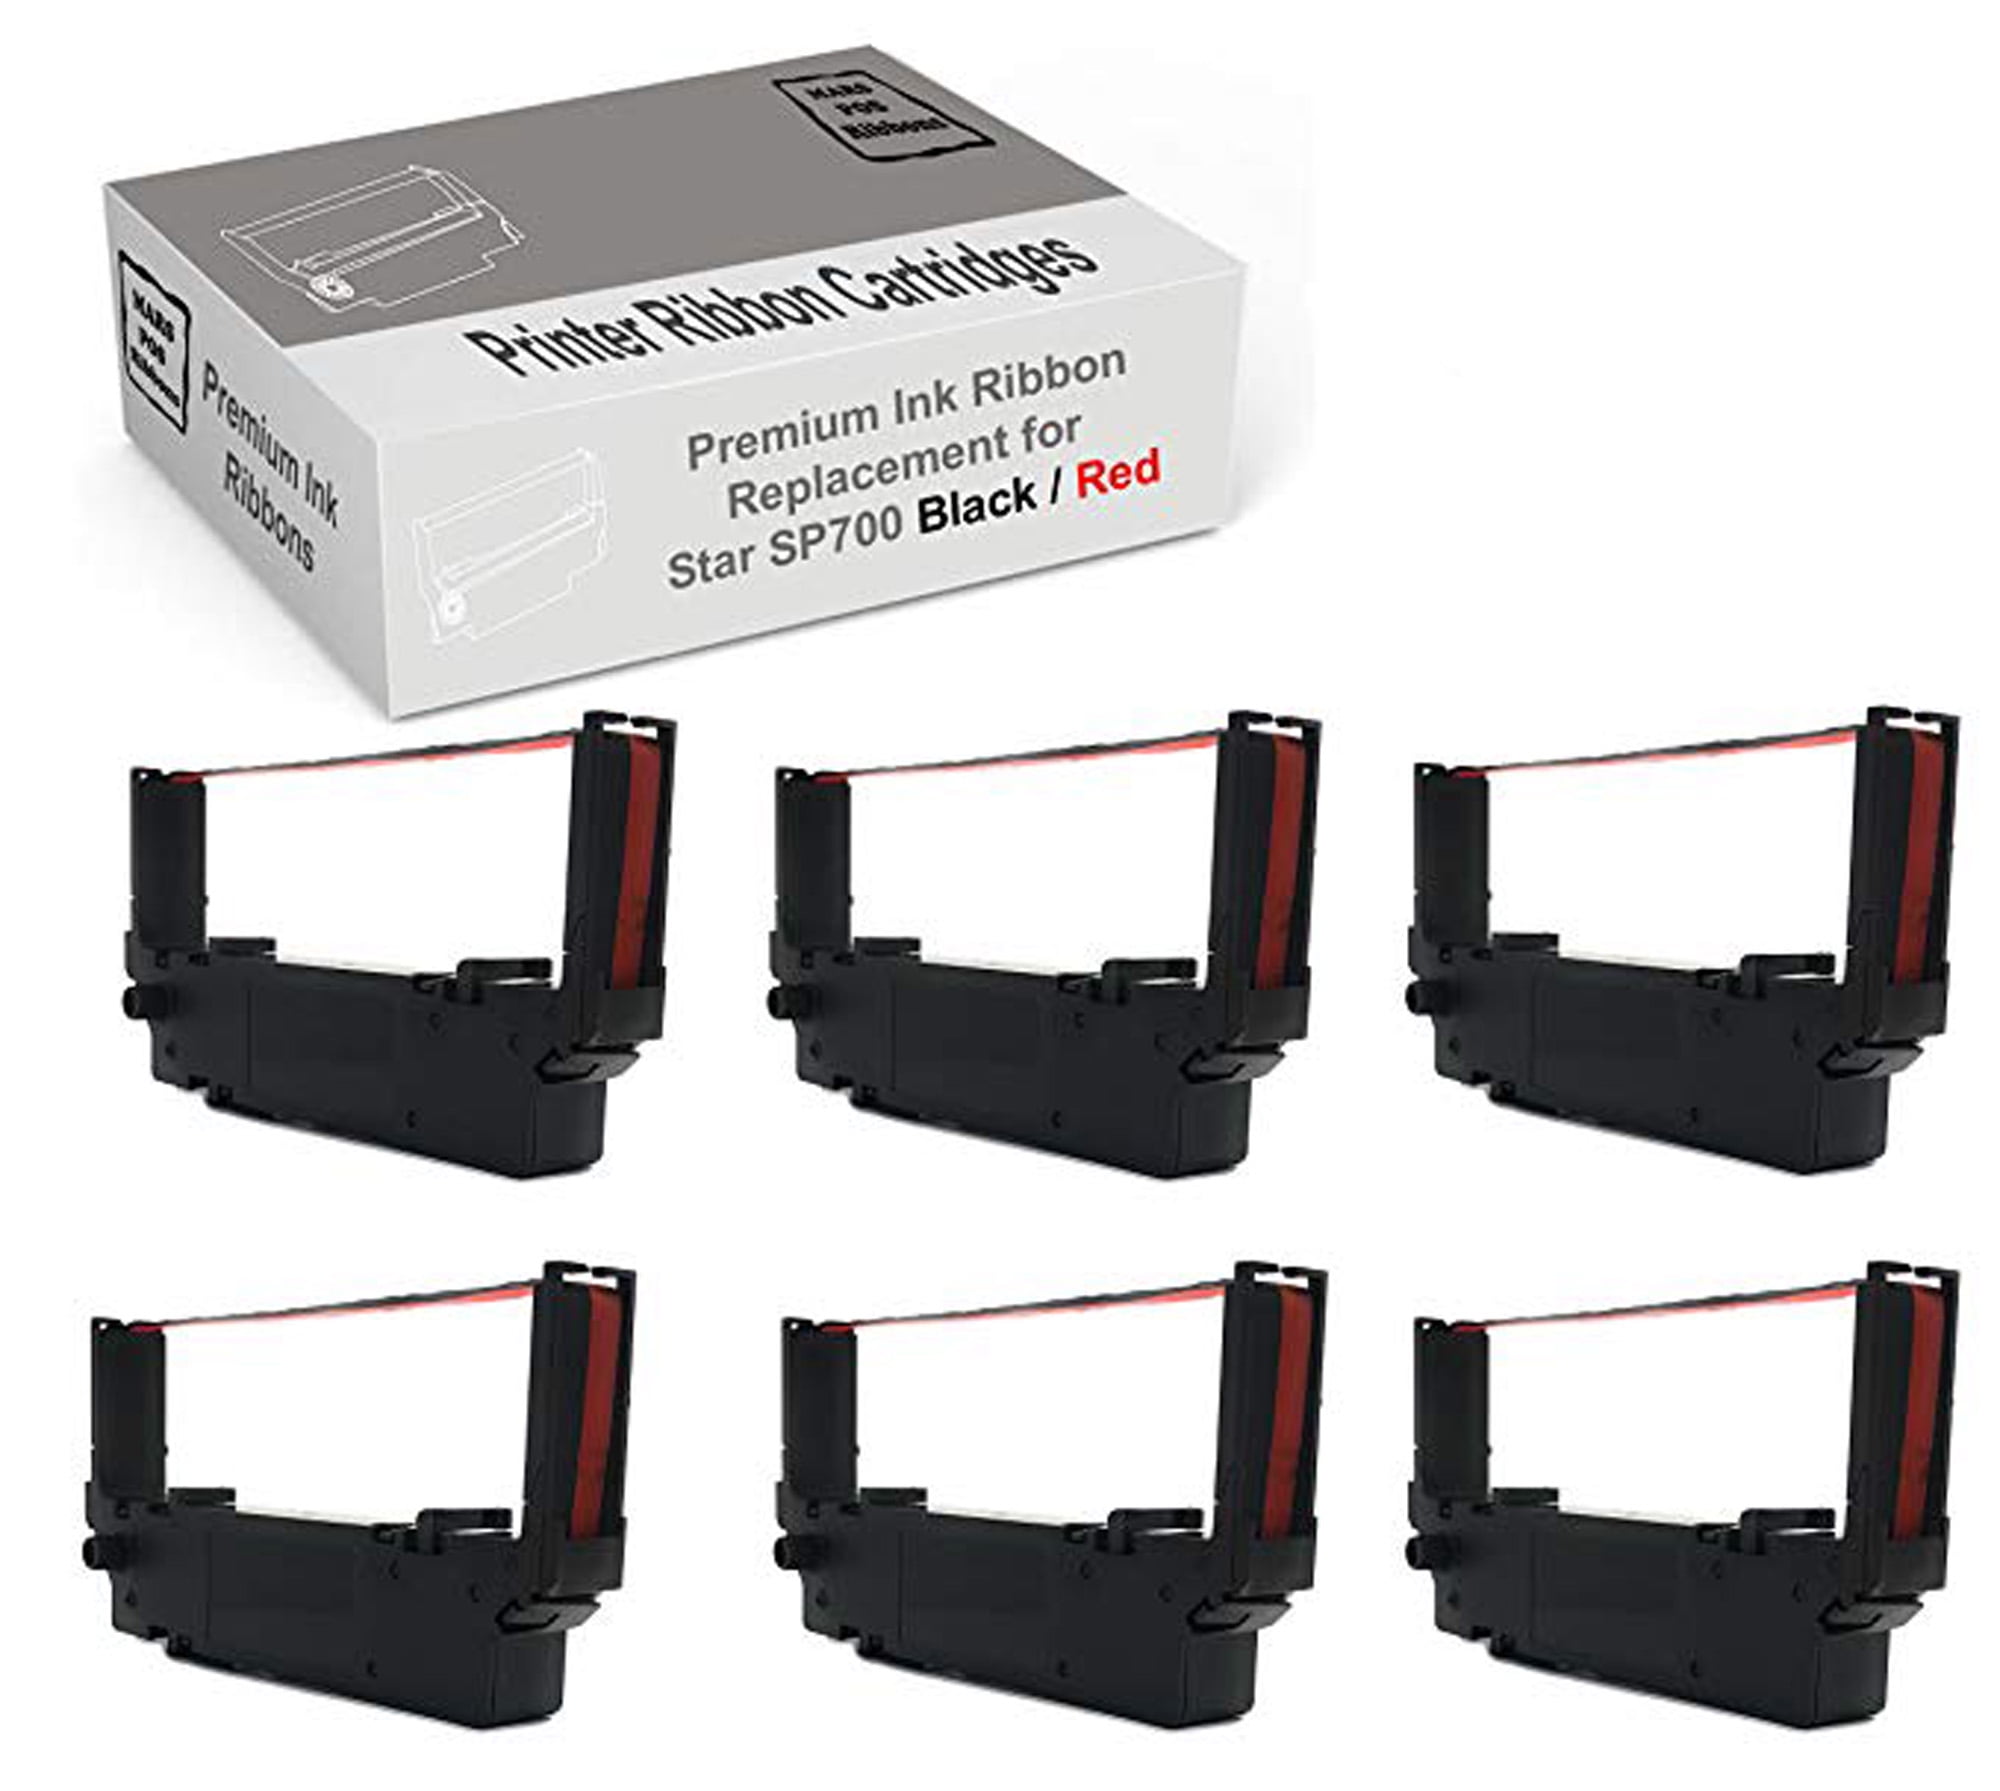 ZIPRINT 12 Pack Compatible Ink Ribbon Replacement for RC700BR Use in SP700 RC700 SP712 SP717 SP742 Printers Black/Red